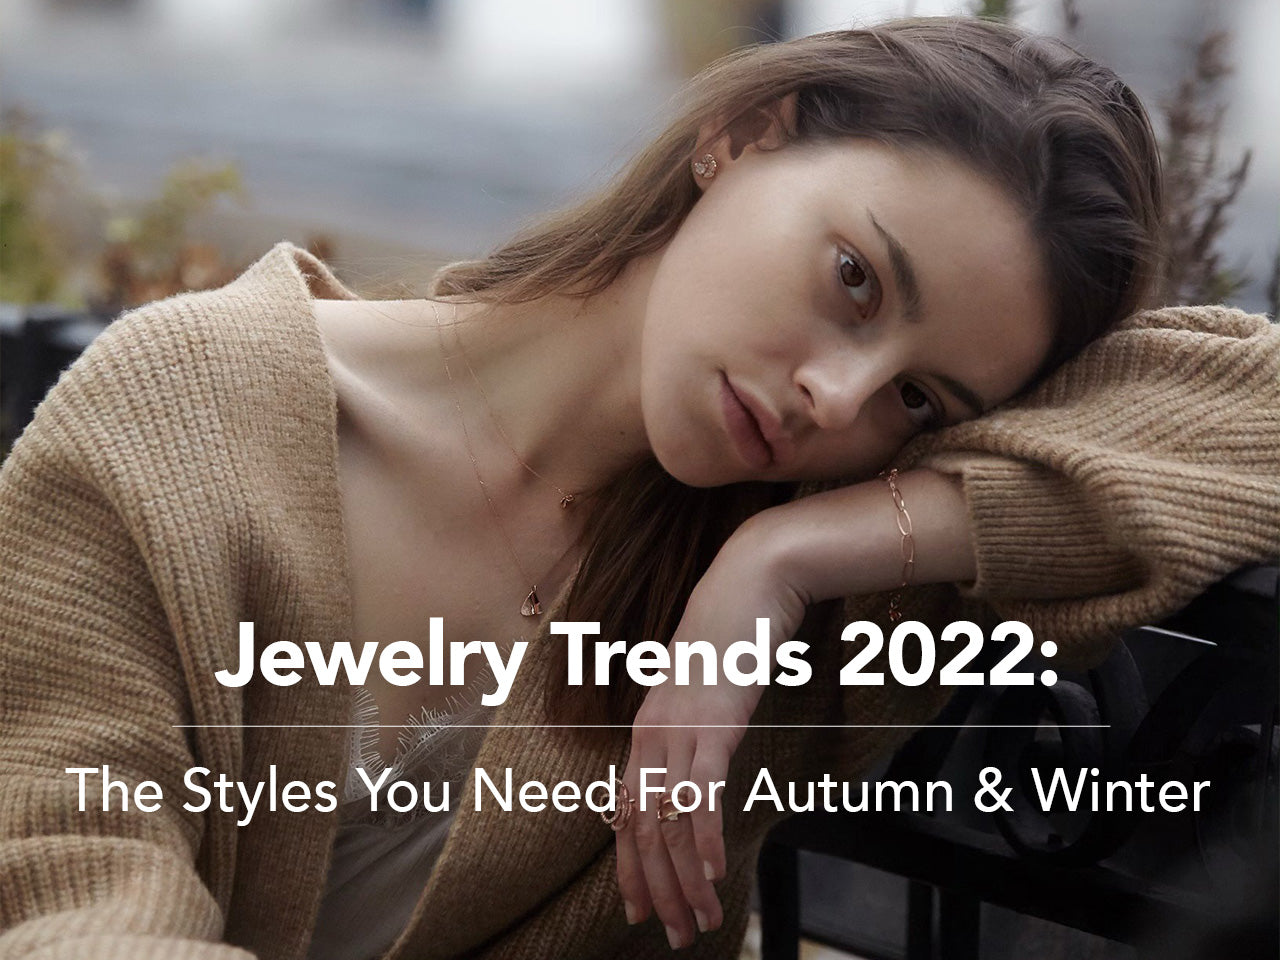 Jewelry Trends 2022: The Styles You Need For Autumn & Winter